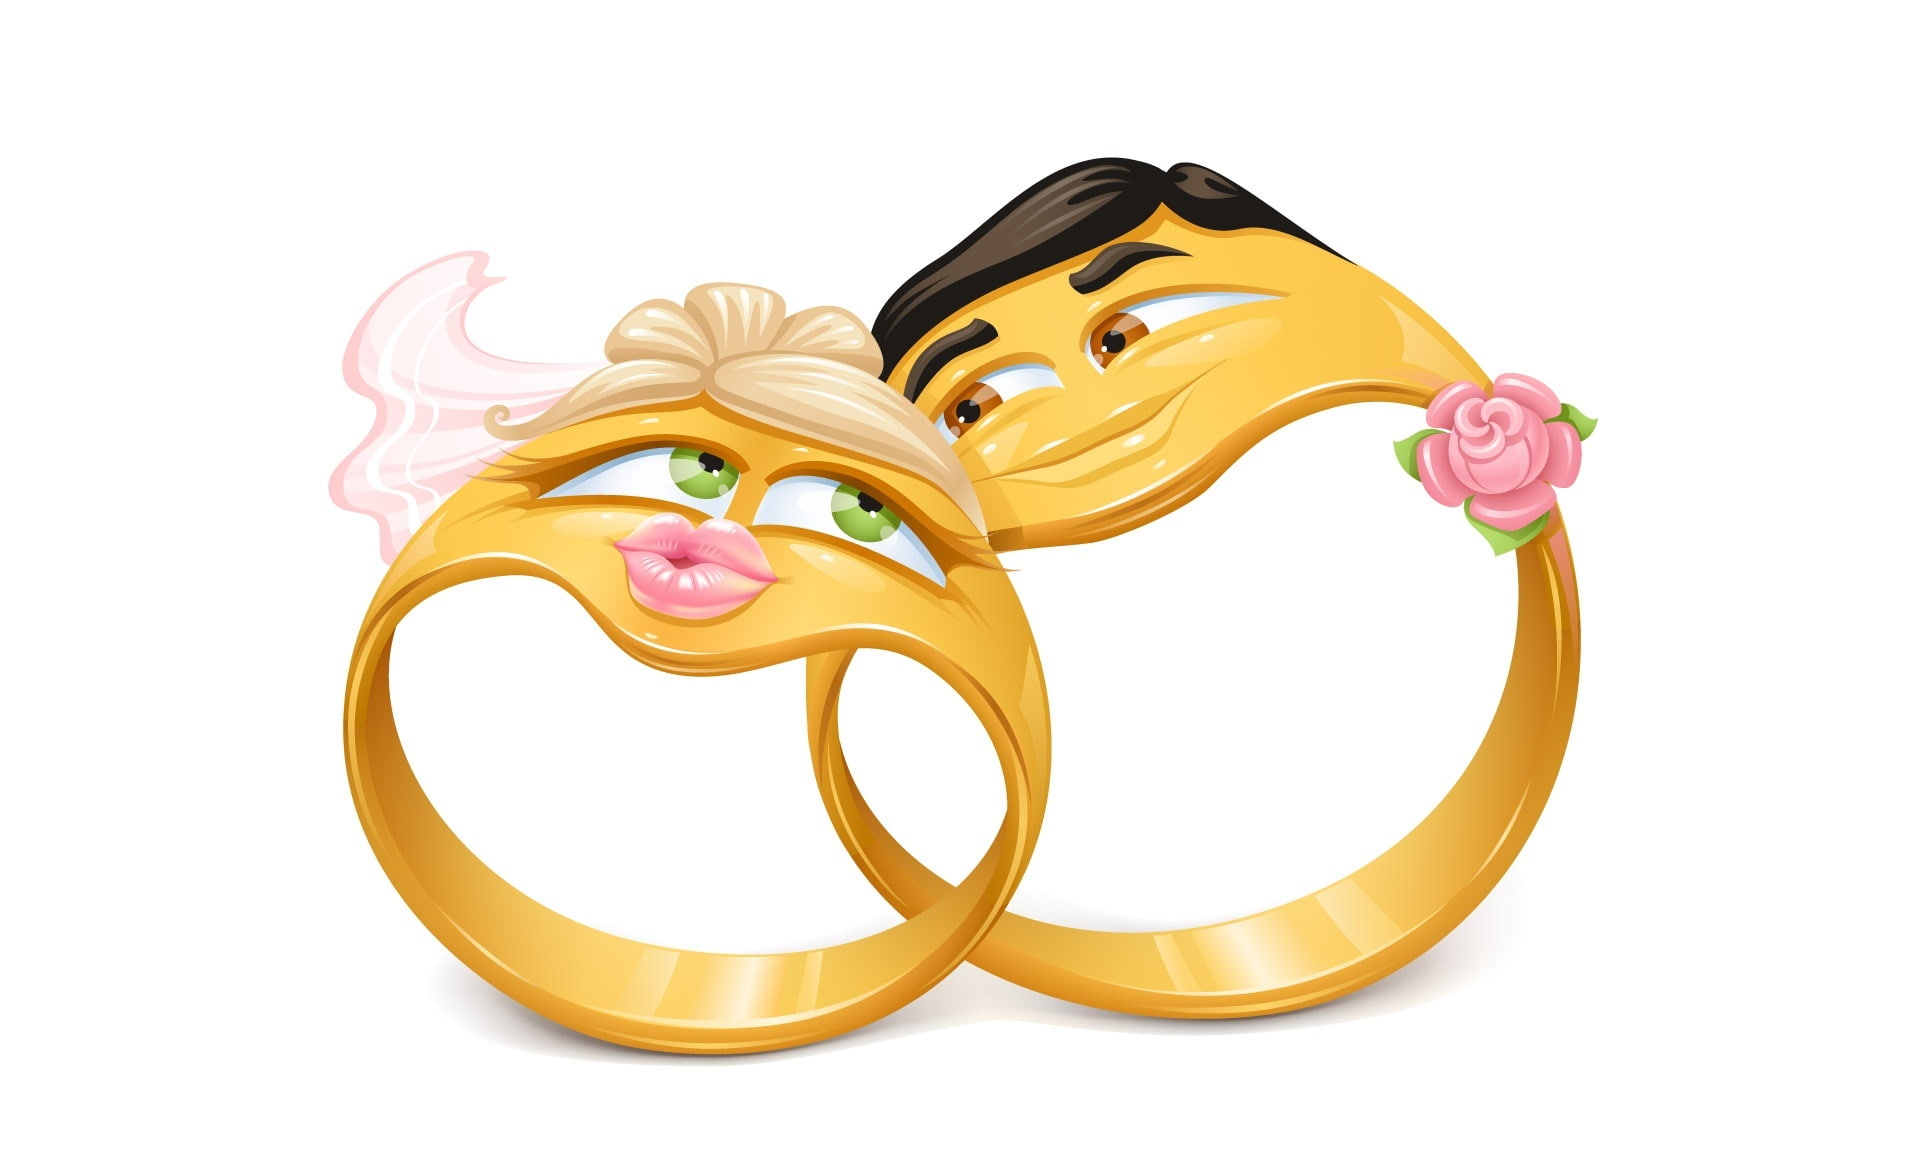 Wedding Rings, man and woman gold-colored couple ring illustration